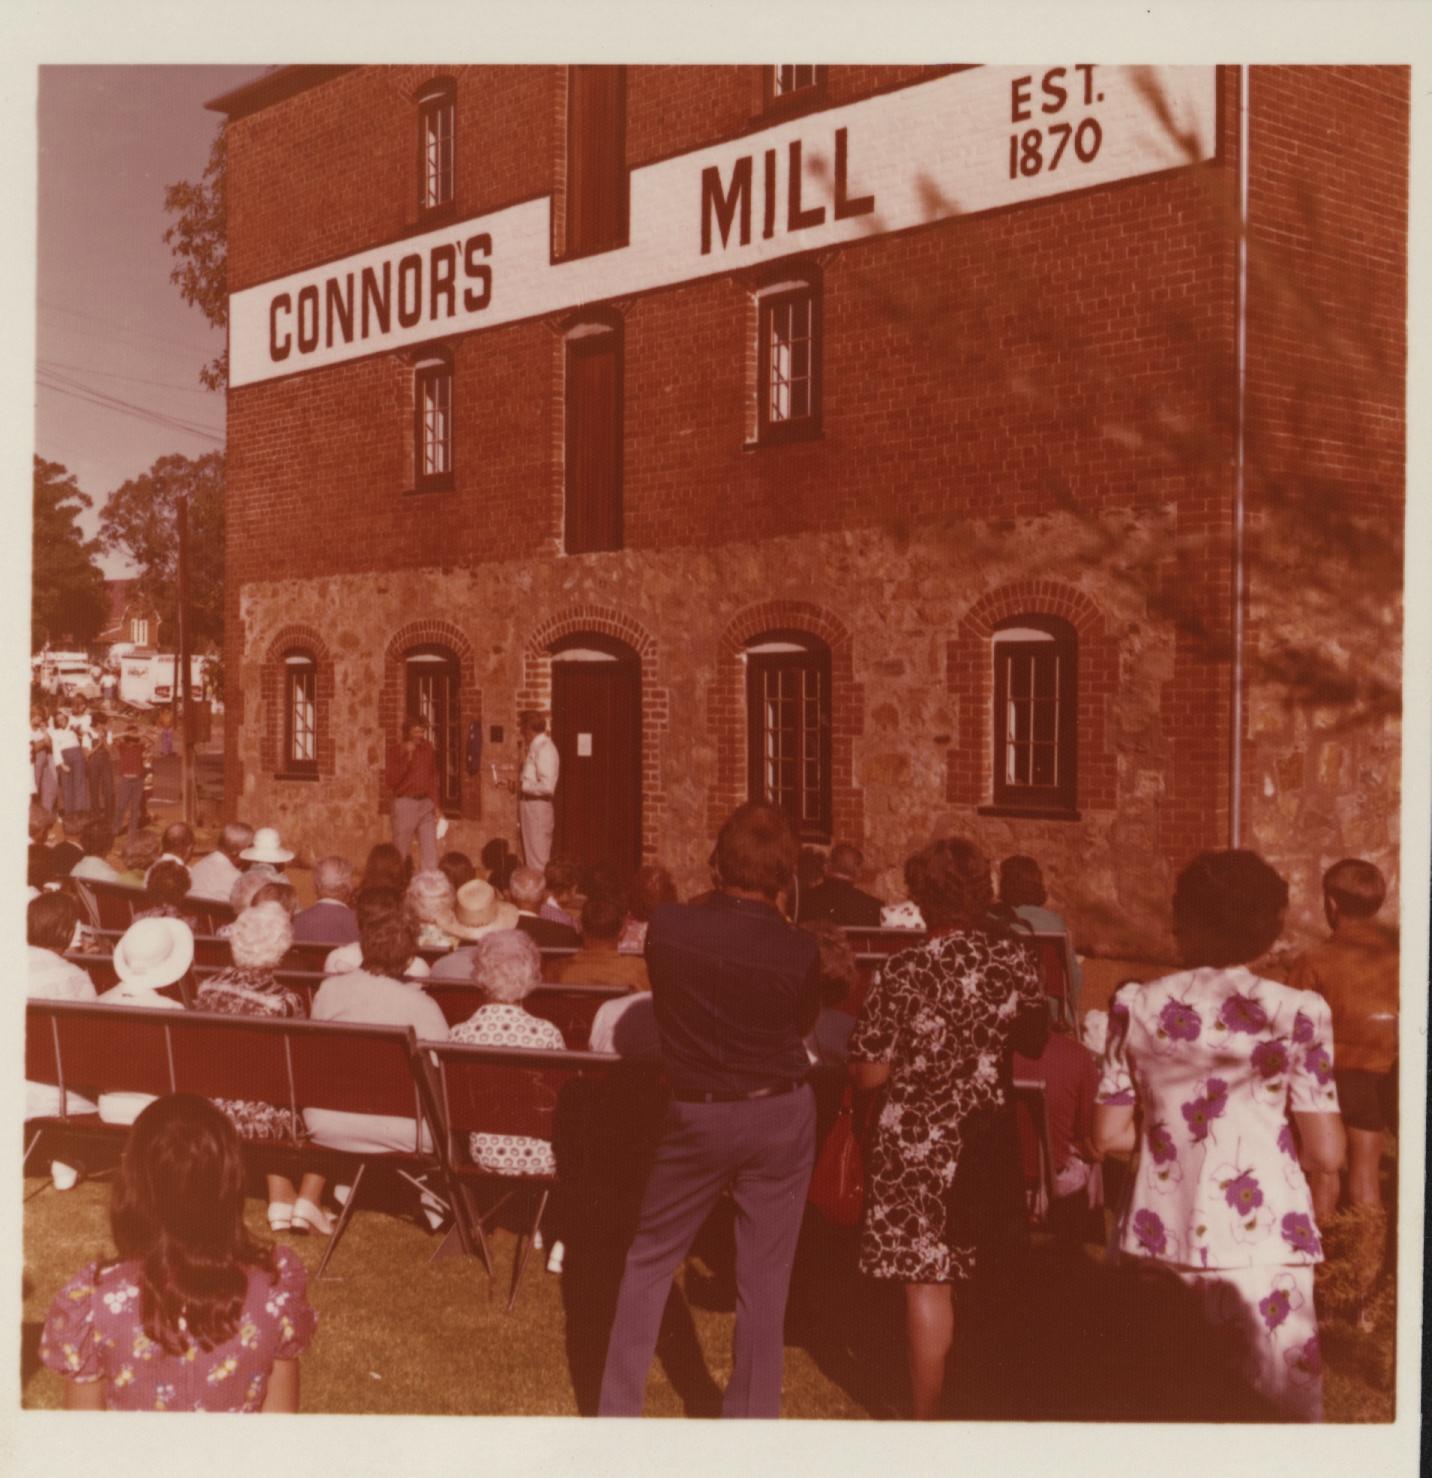 Formal opening of the Toodyay Tourist Centre in Connor's Mill, 1976